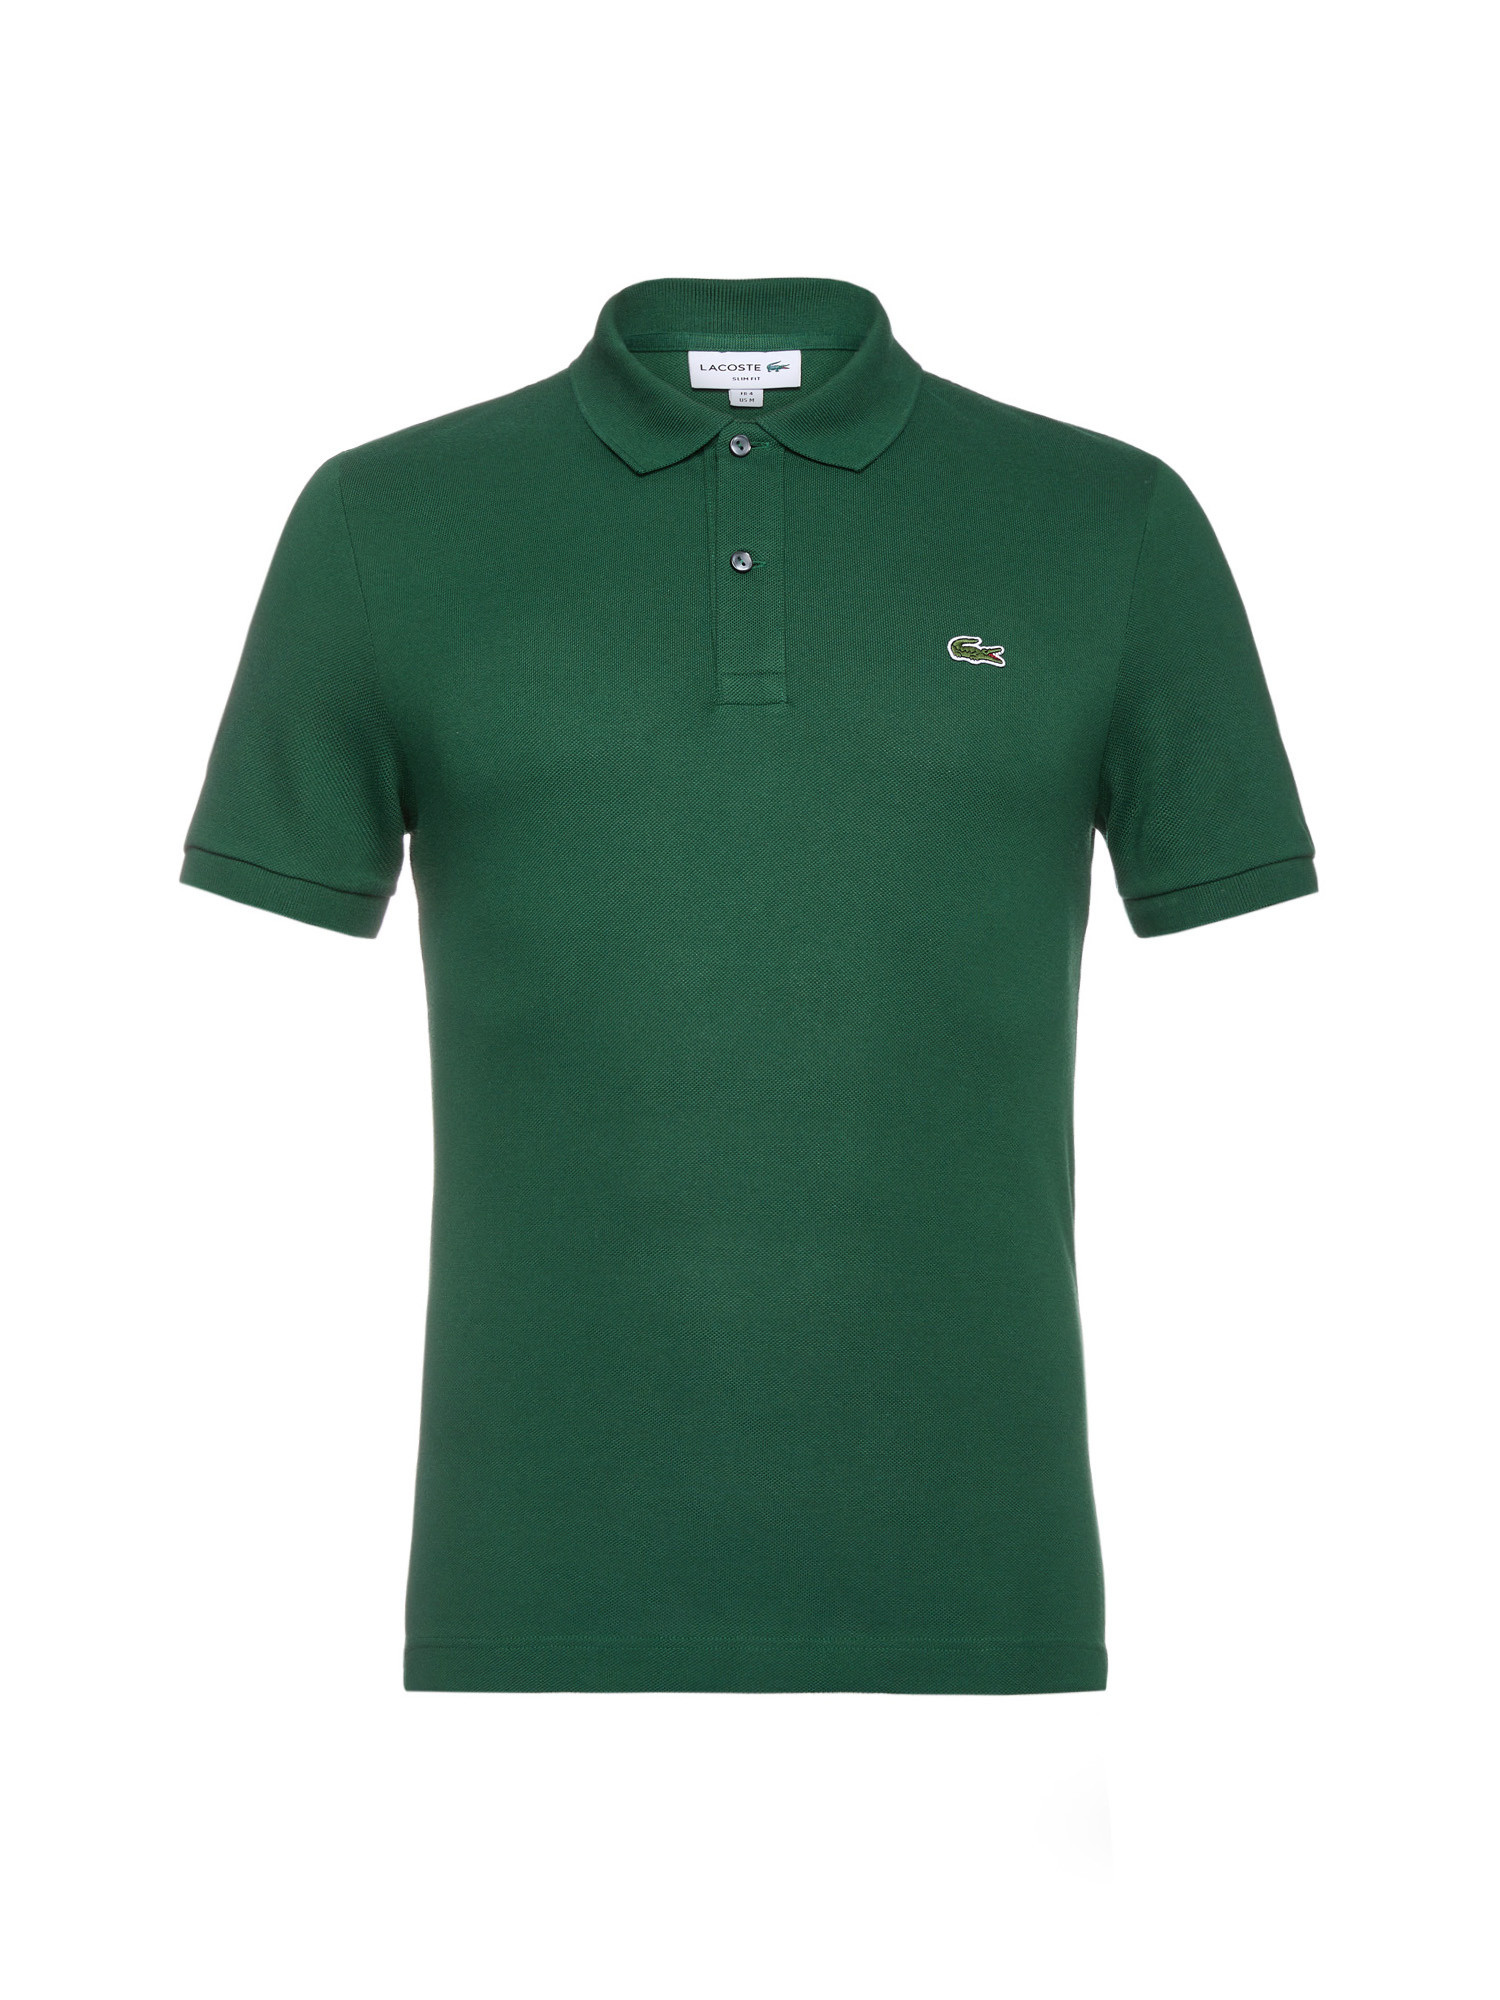 Polo shirt, Green, large image number 0